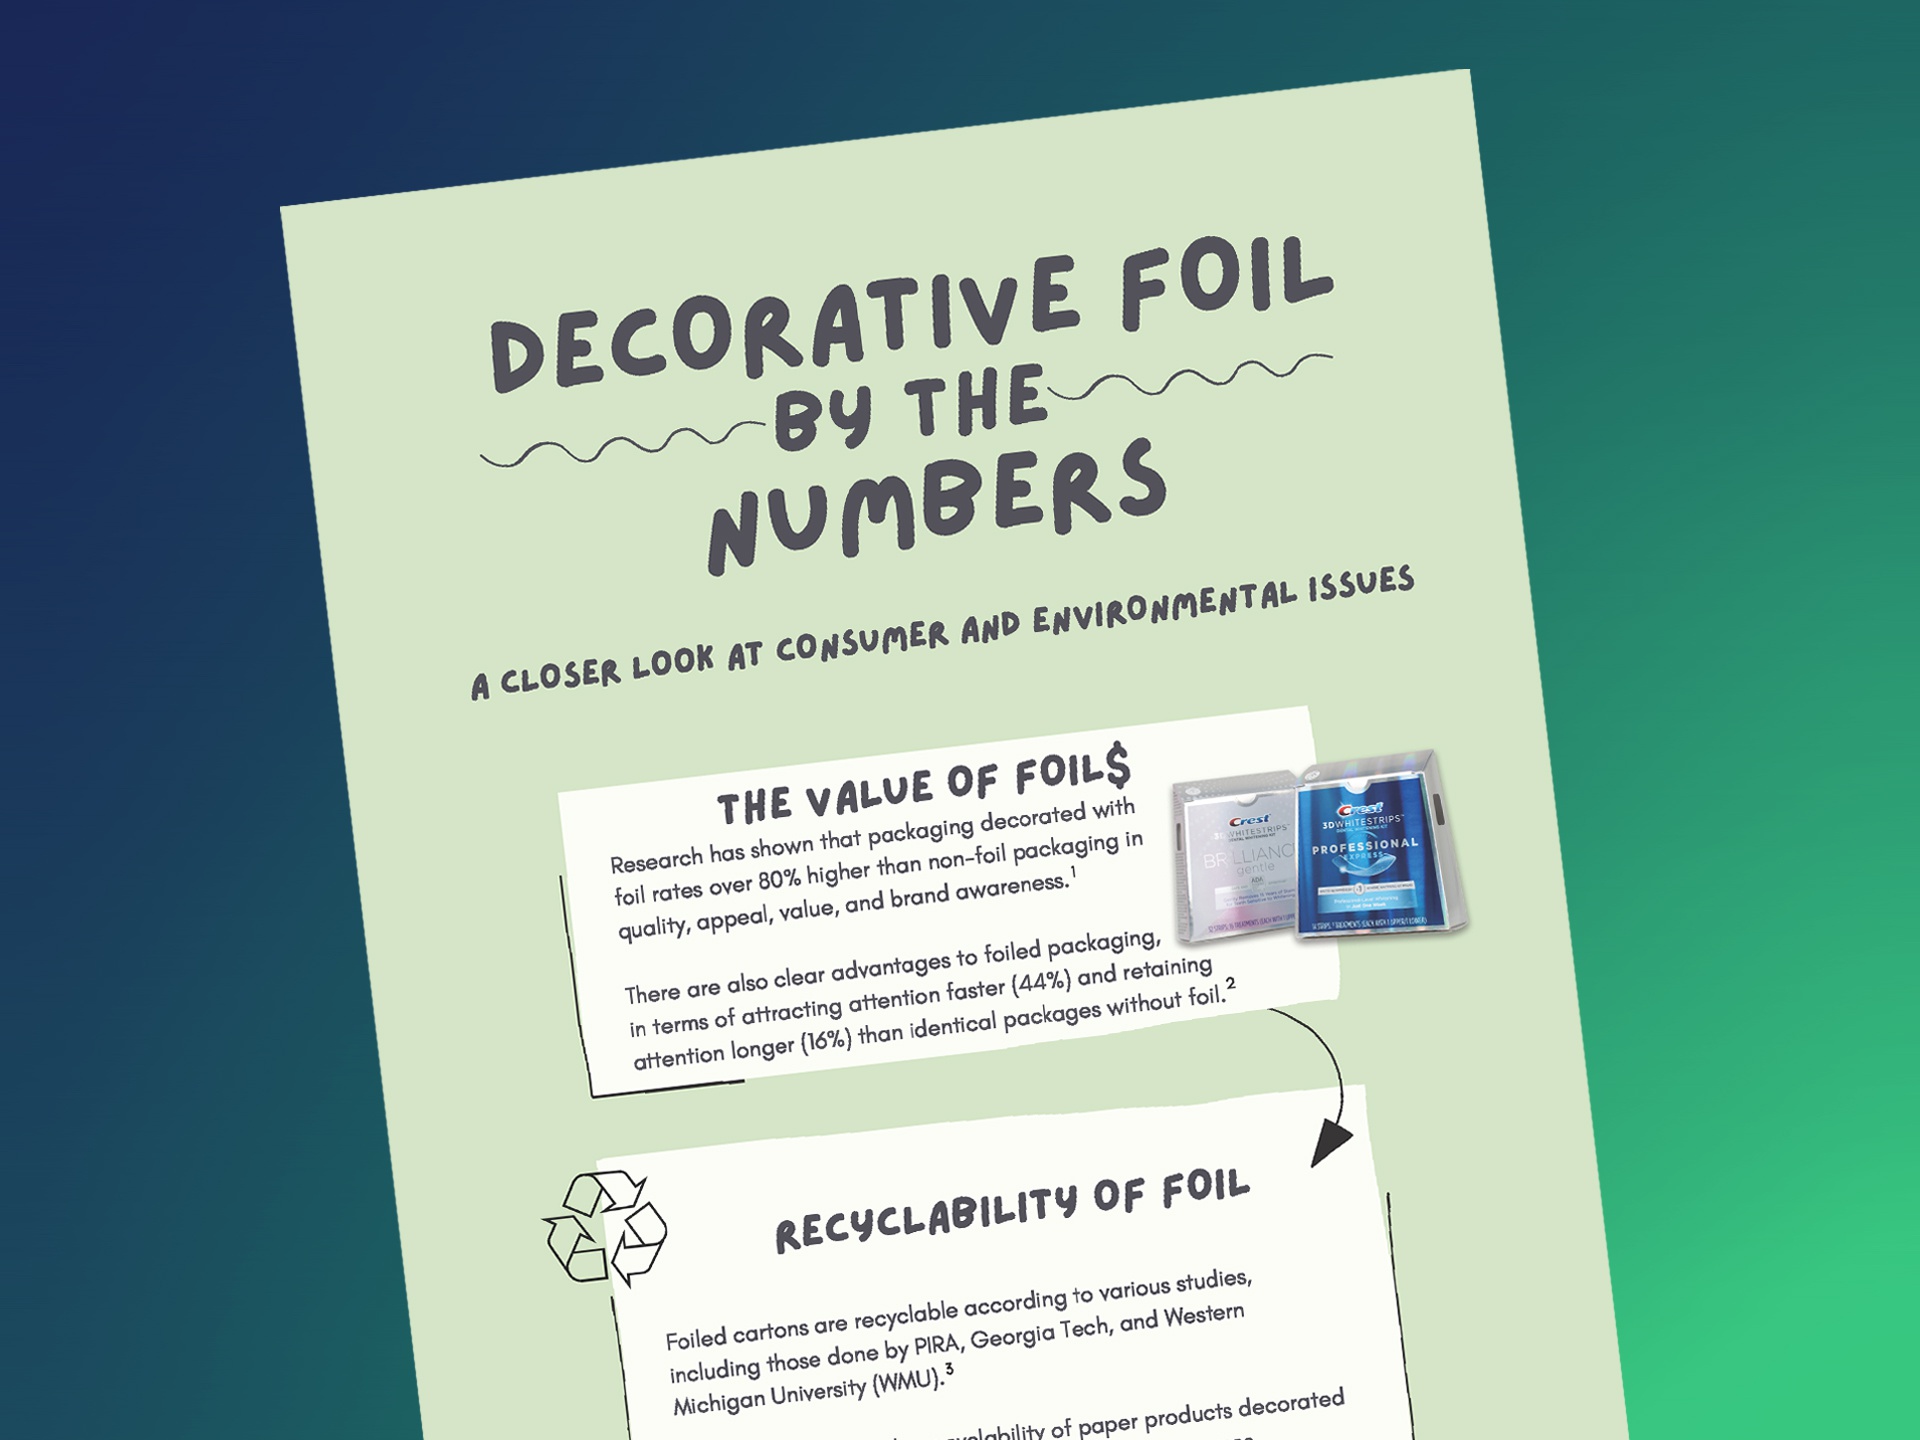 Diamond Packaging Decorative Foil by the Numbers infographic